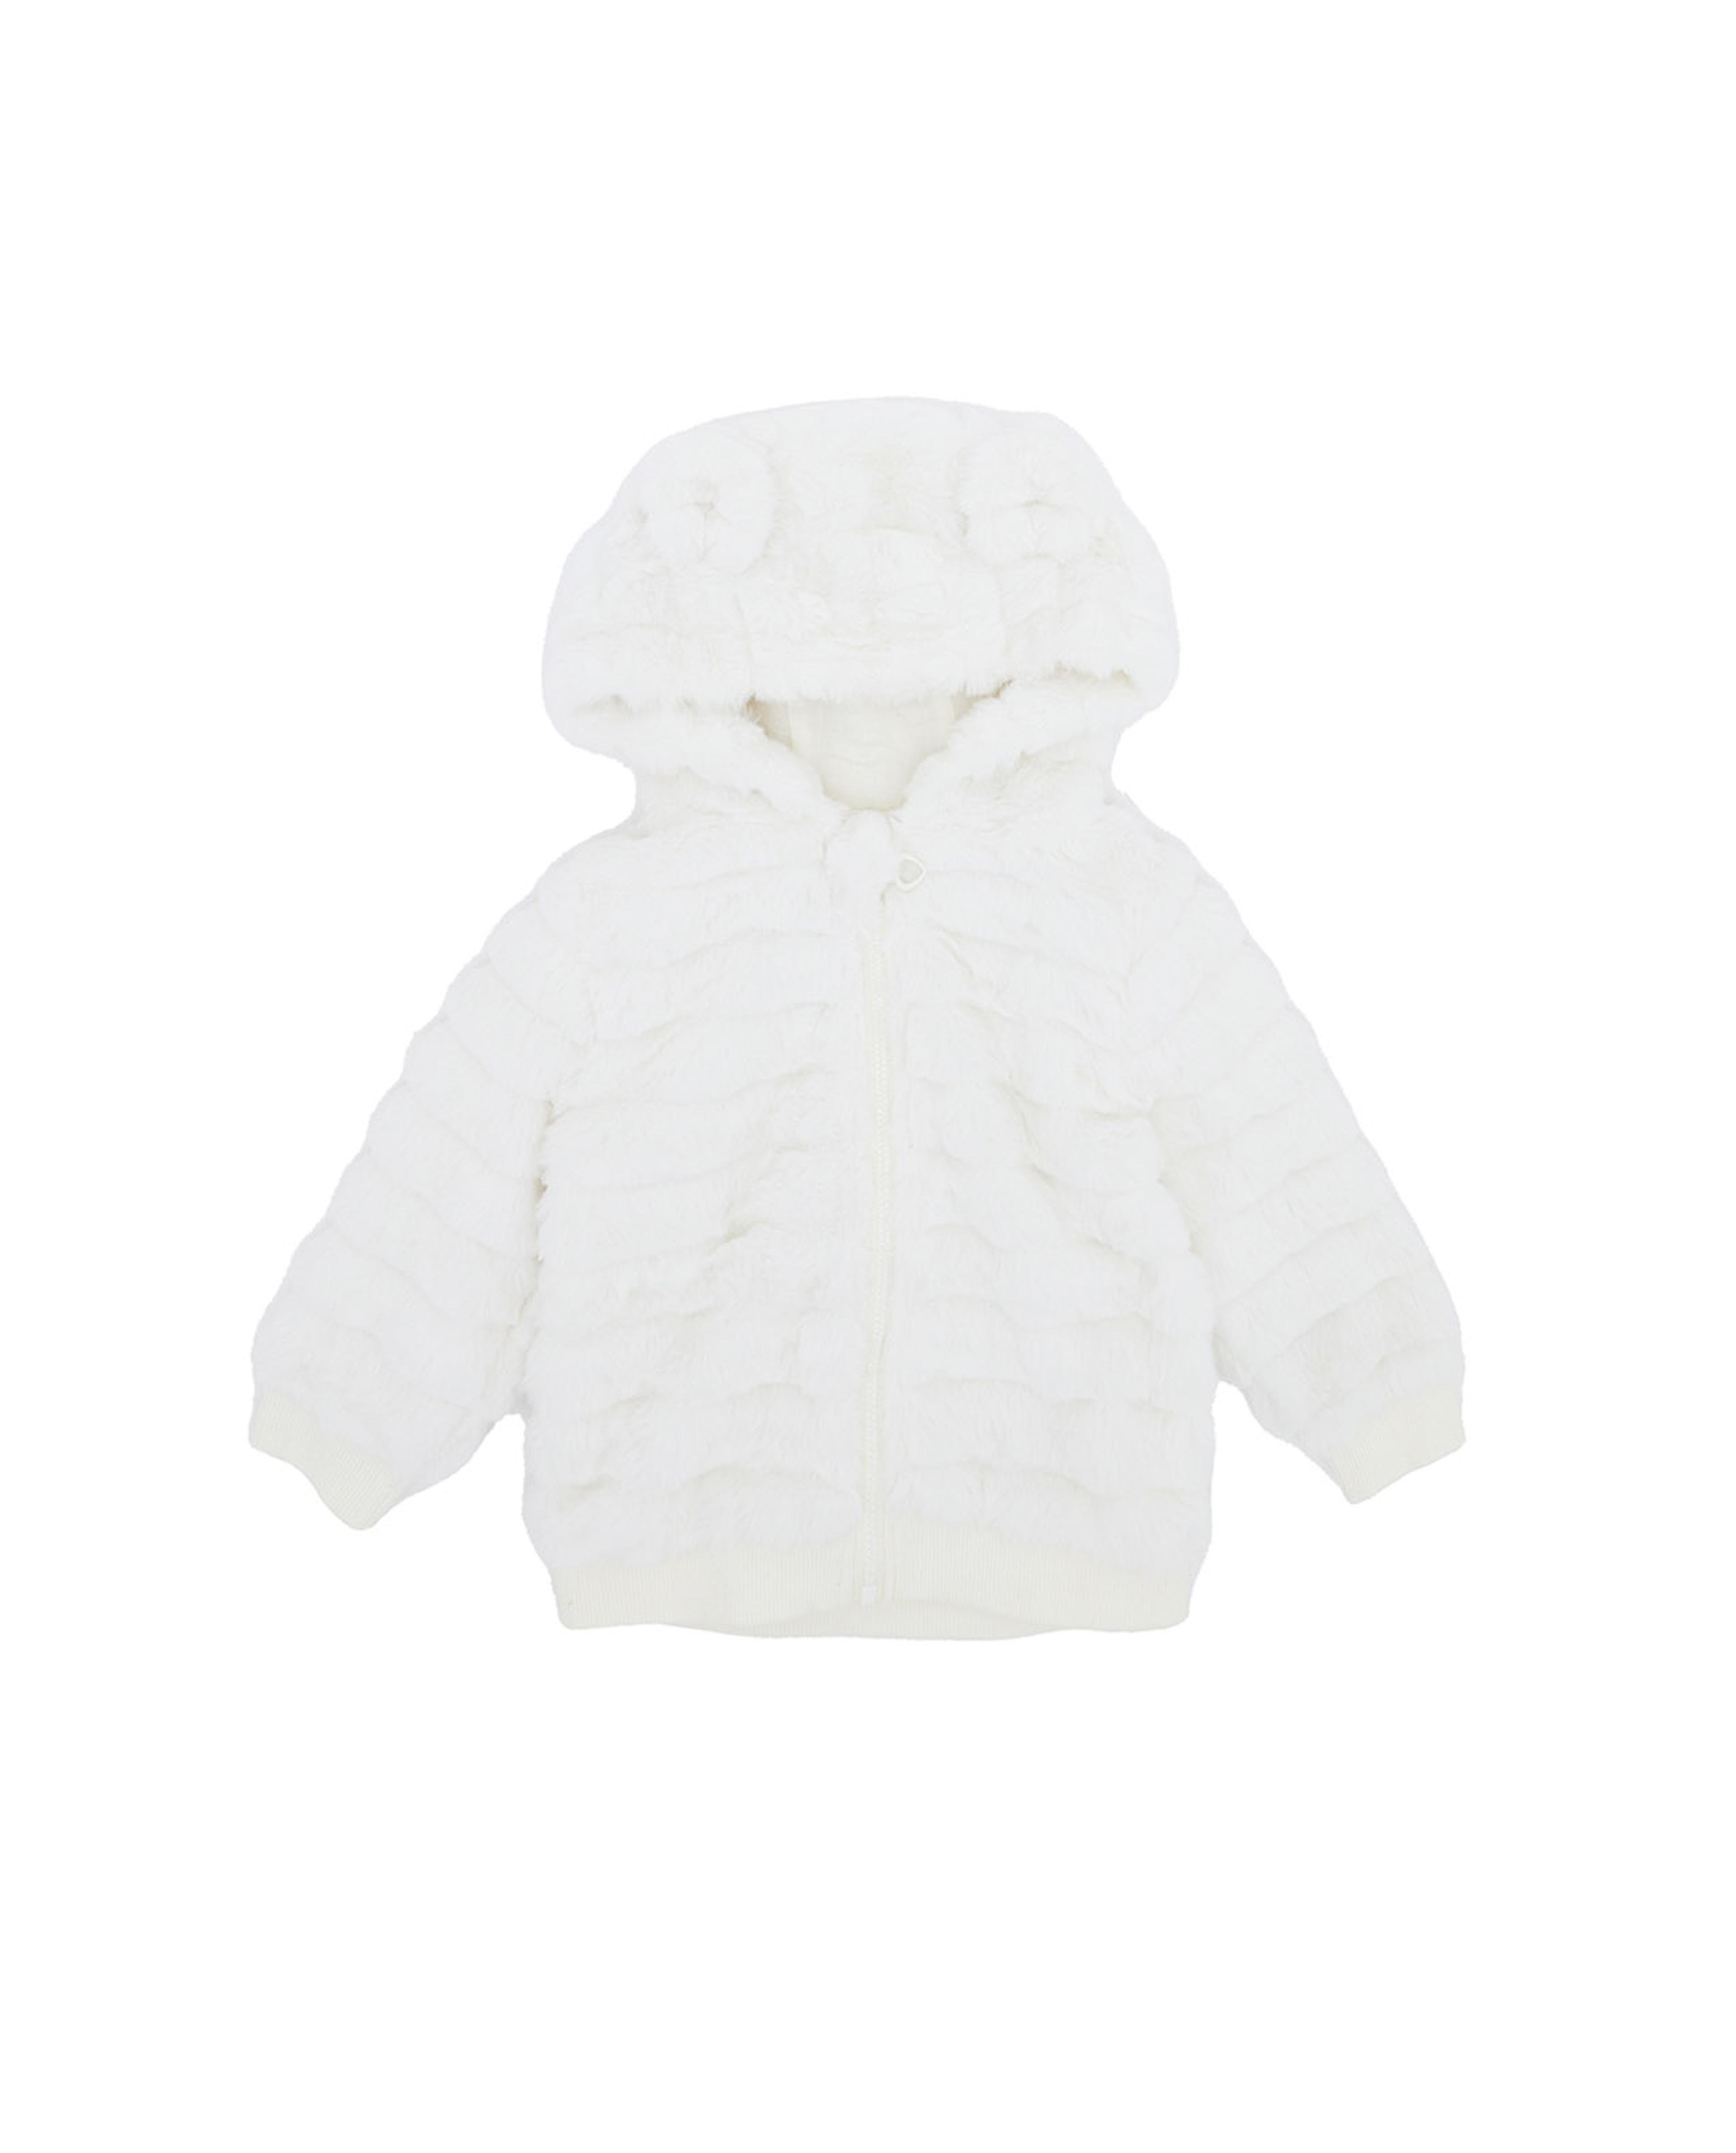 Furry Hooded Jacket with Zipper Closure